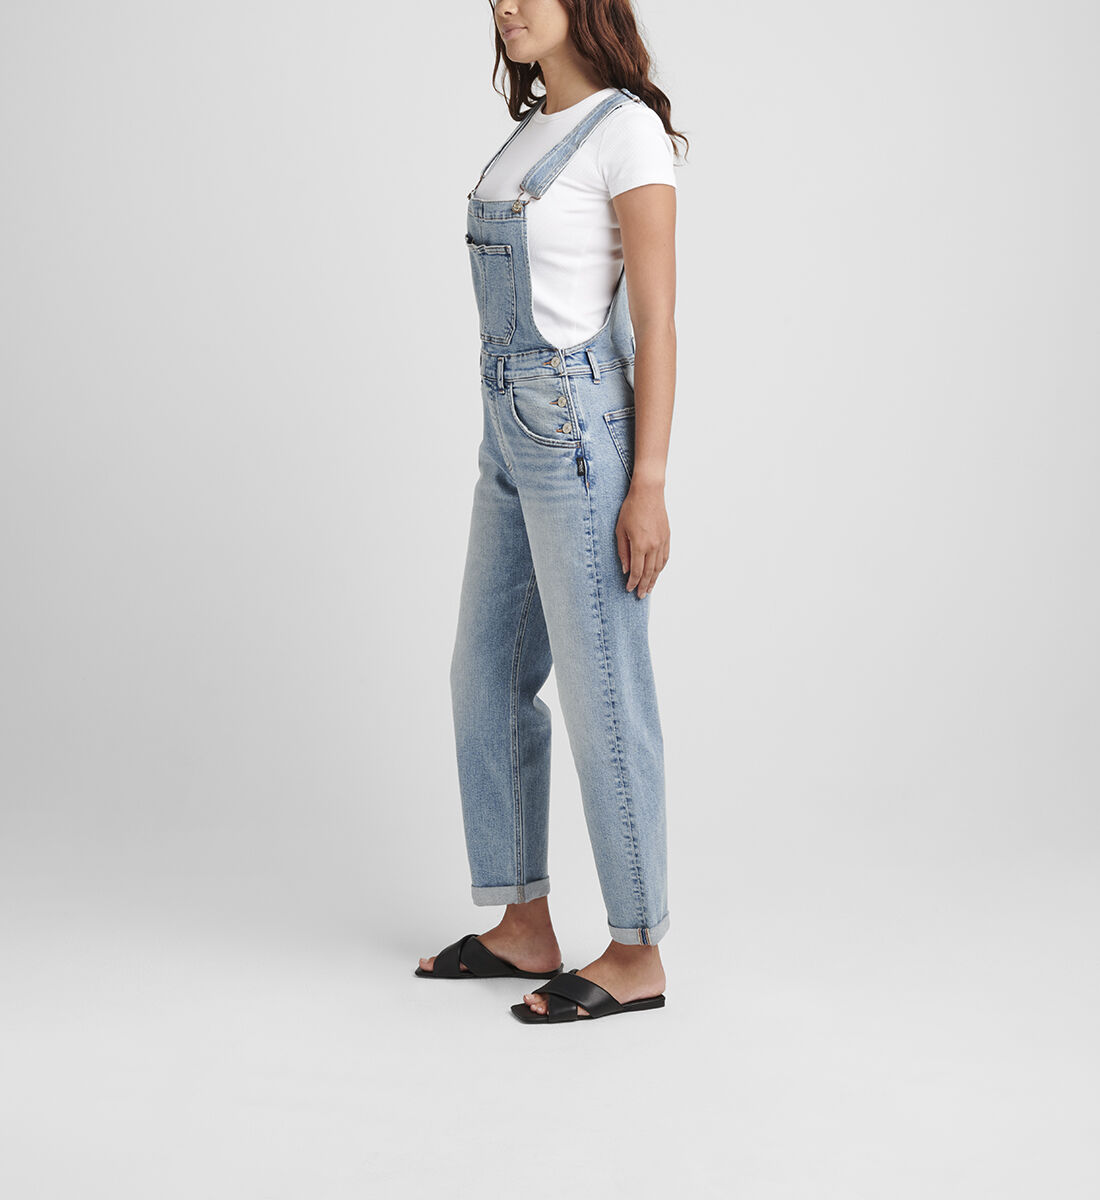 Buy Baggy Straight Leg Overalls for USD 49.00 | Silver Jeans US New